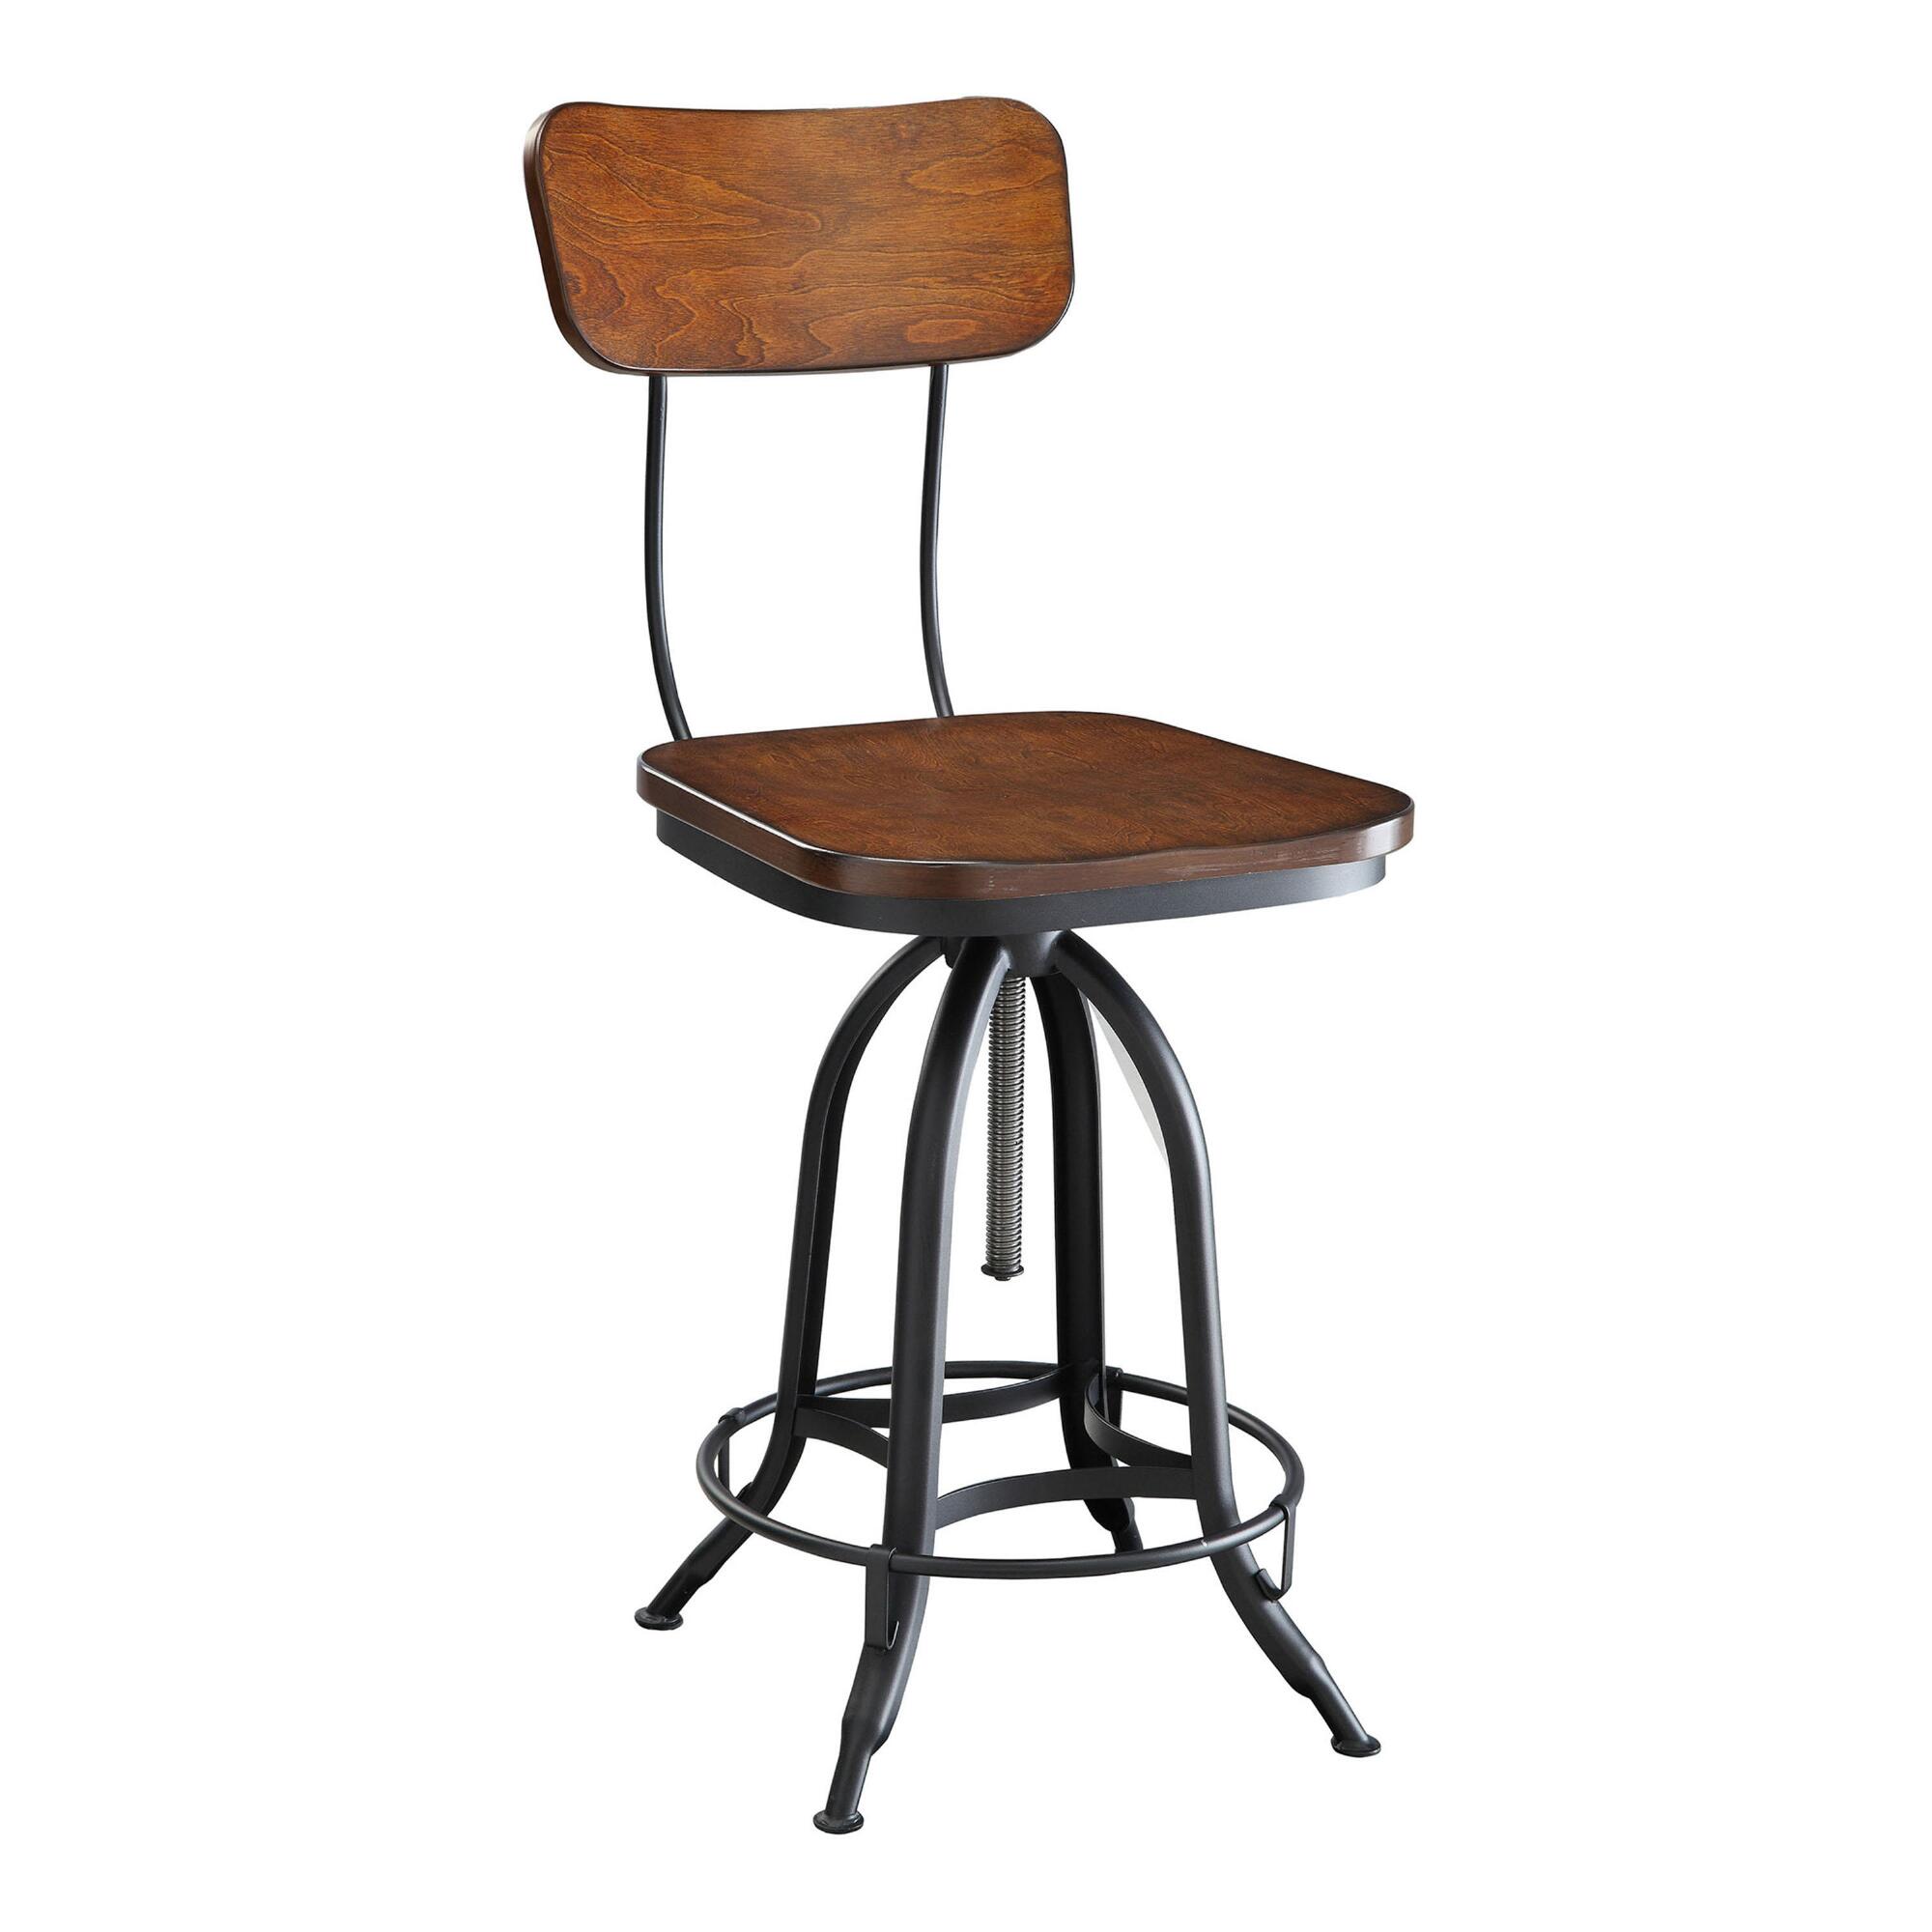 Wood and Metal Adjustable Height Dowell Stool by World Market